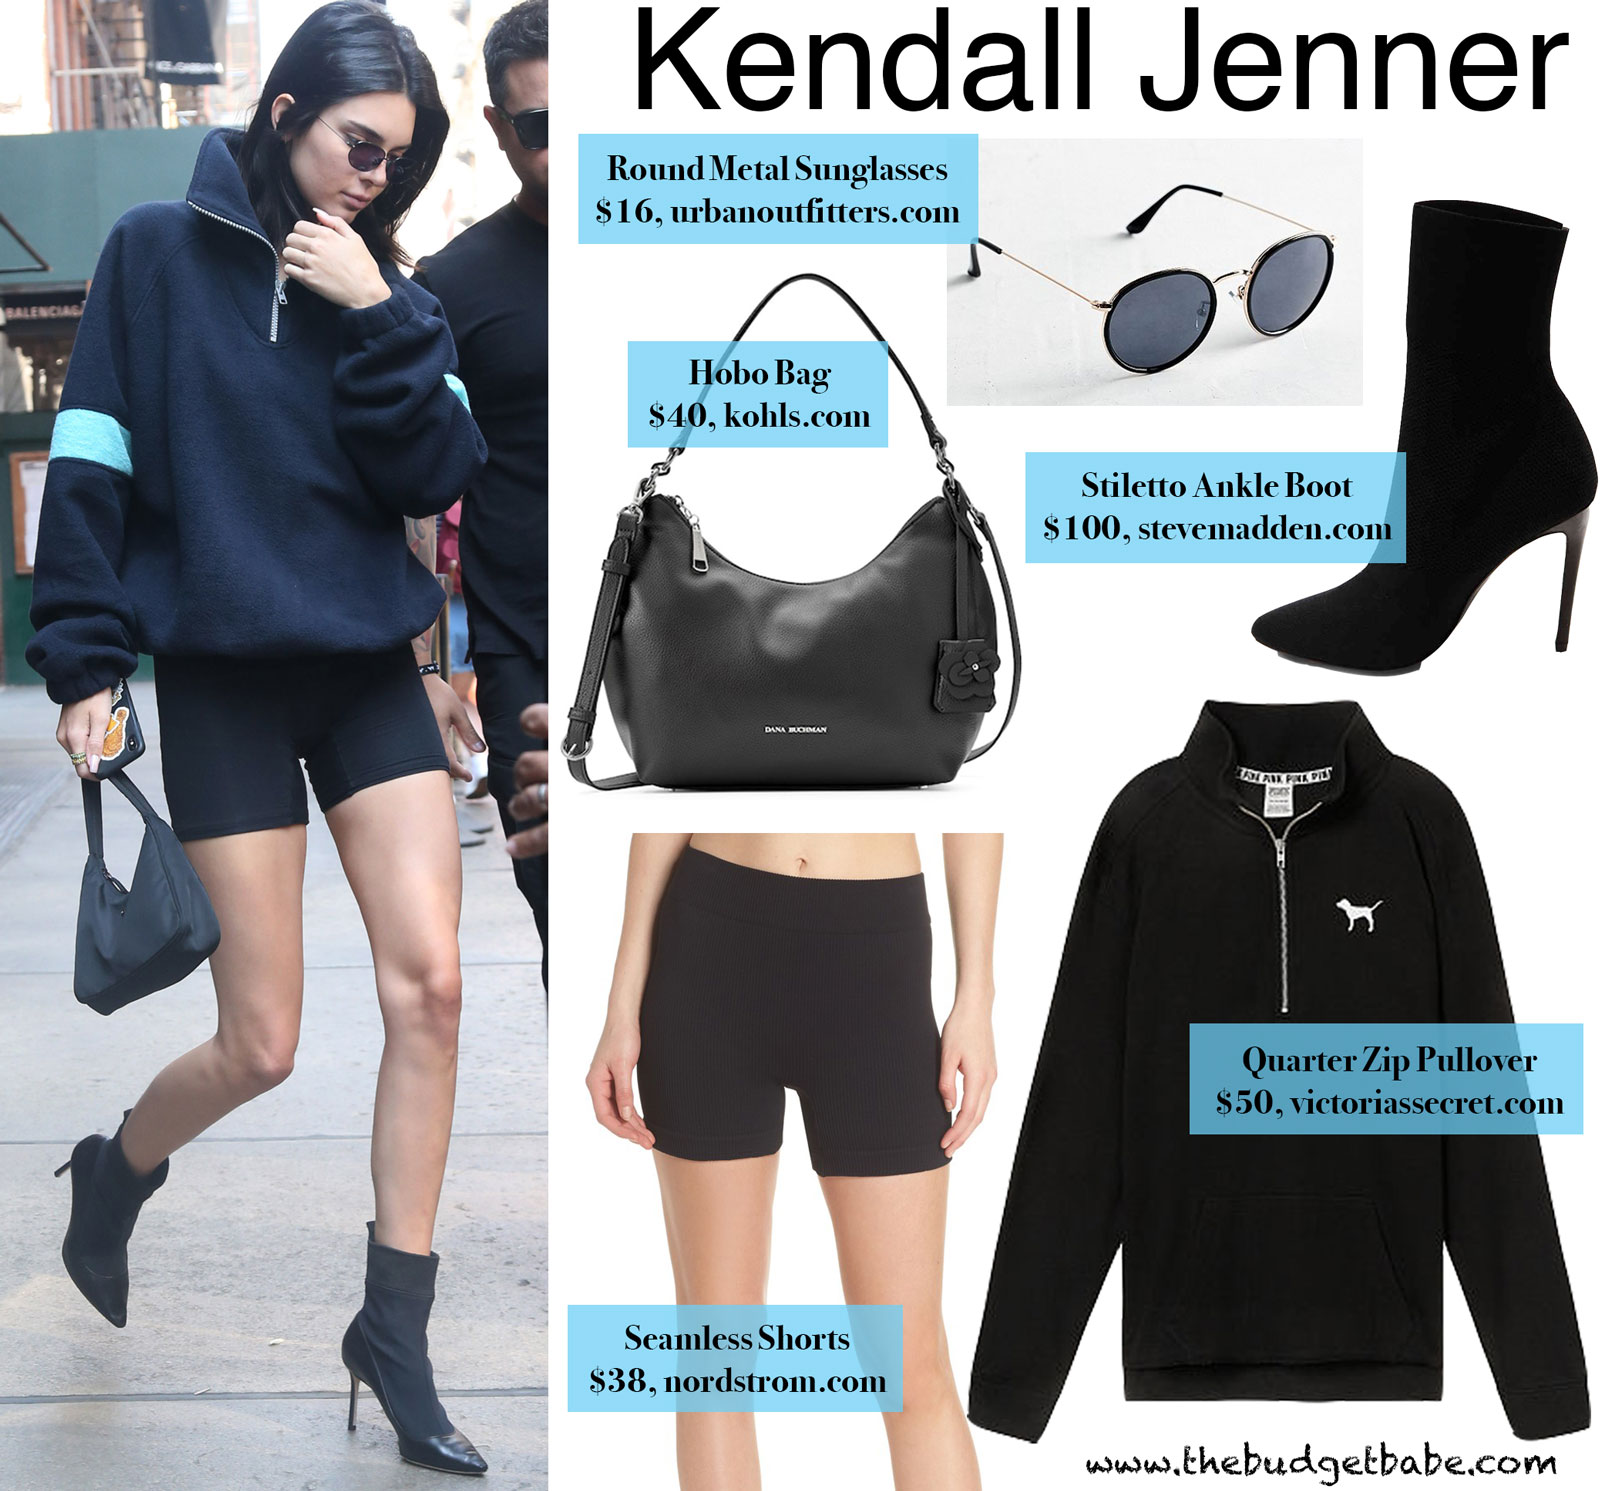 Kendall Jenner Ankle Boots and Quarter Zip Pullover Look for Less